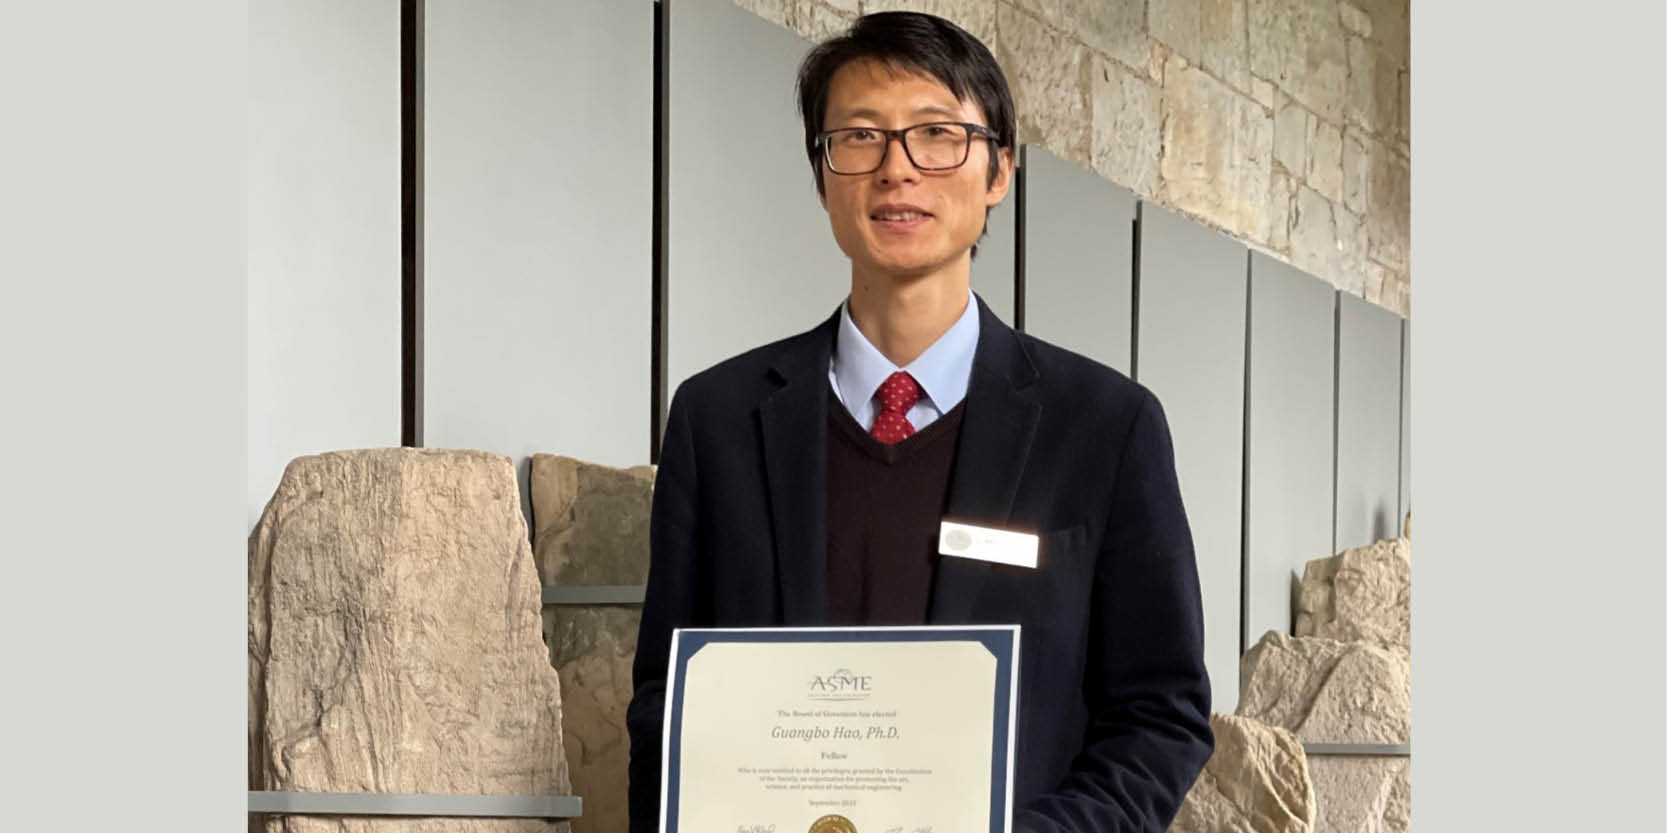 Dr Guangbo Hao elected as Fellow of the American Society of Mechanical Engineers